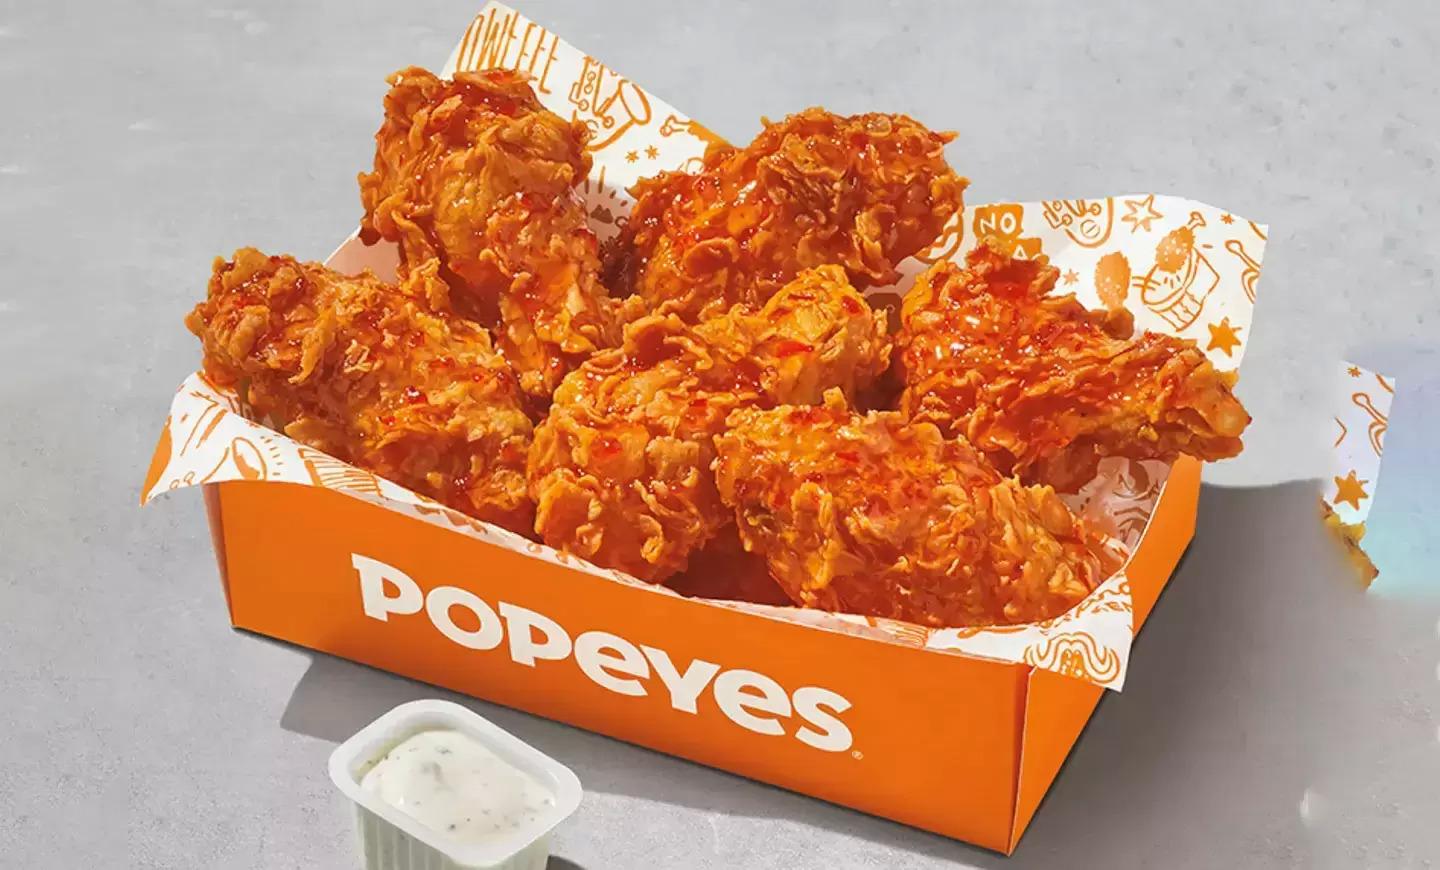 Popeyes 6-Piece Chicken Wings Buy One Get One $1